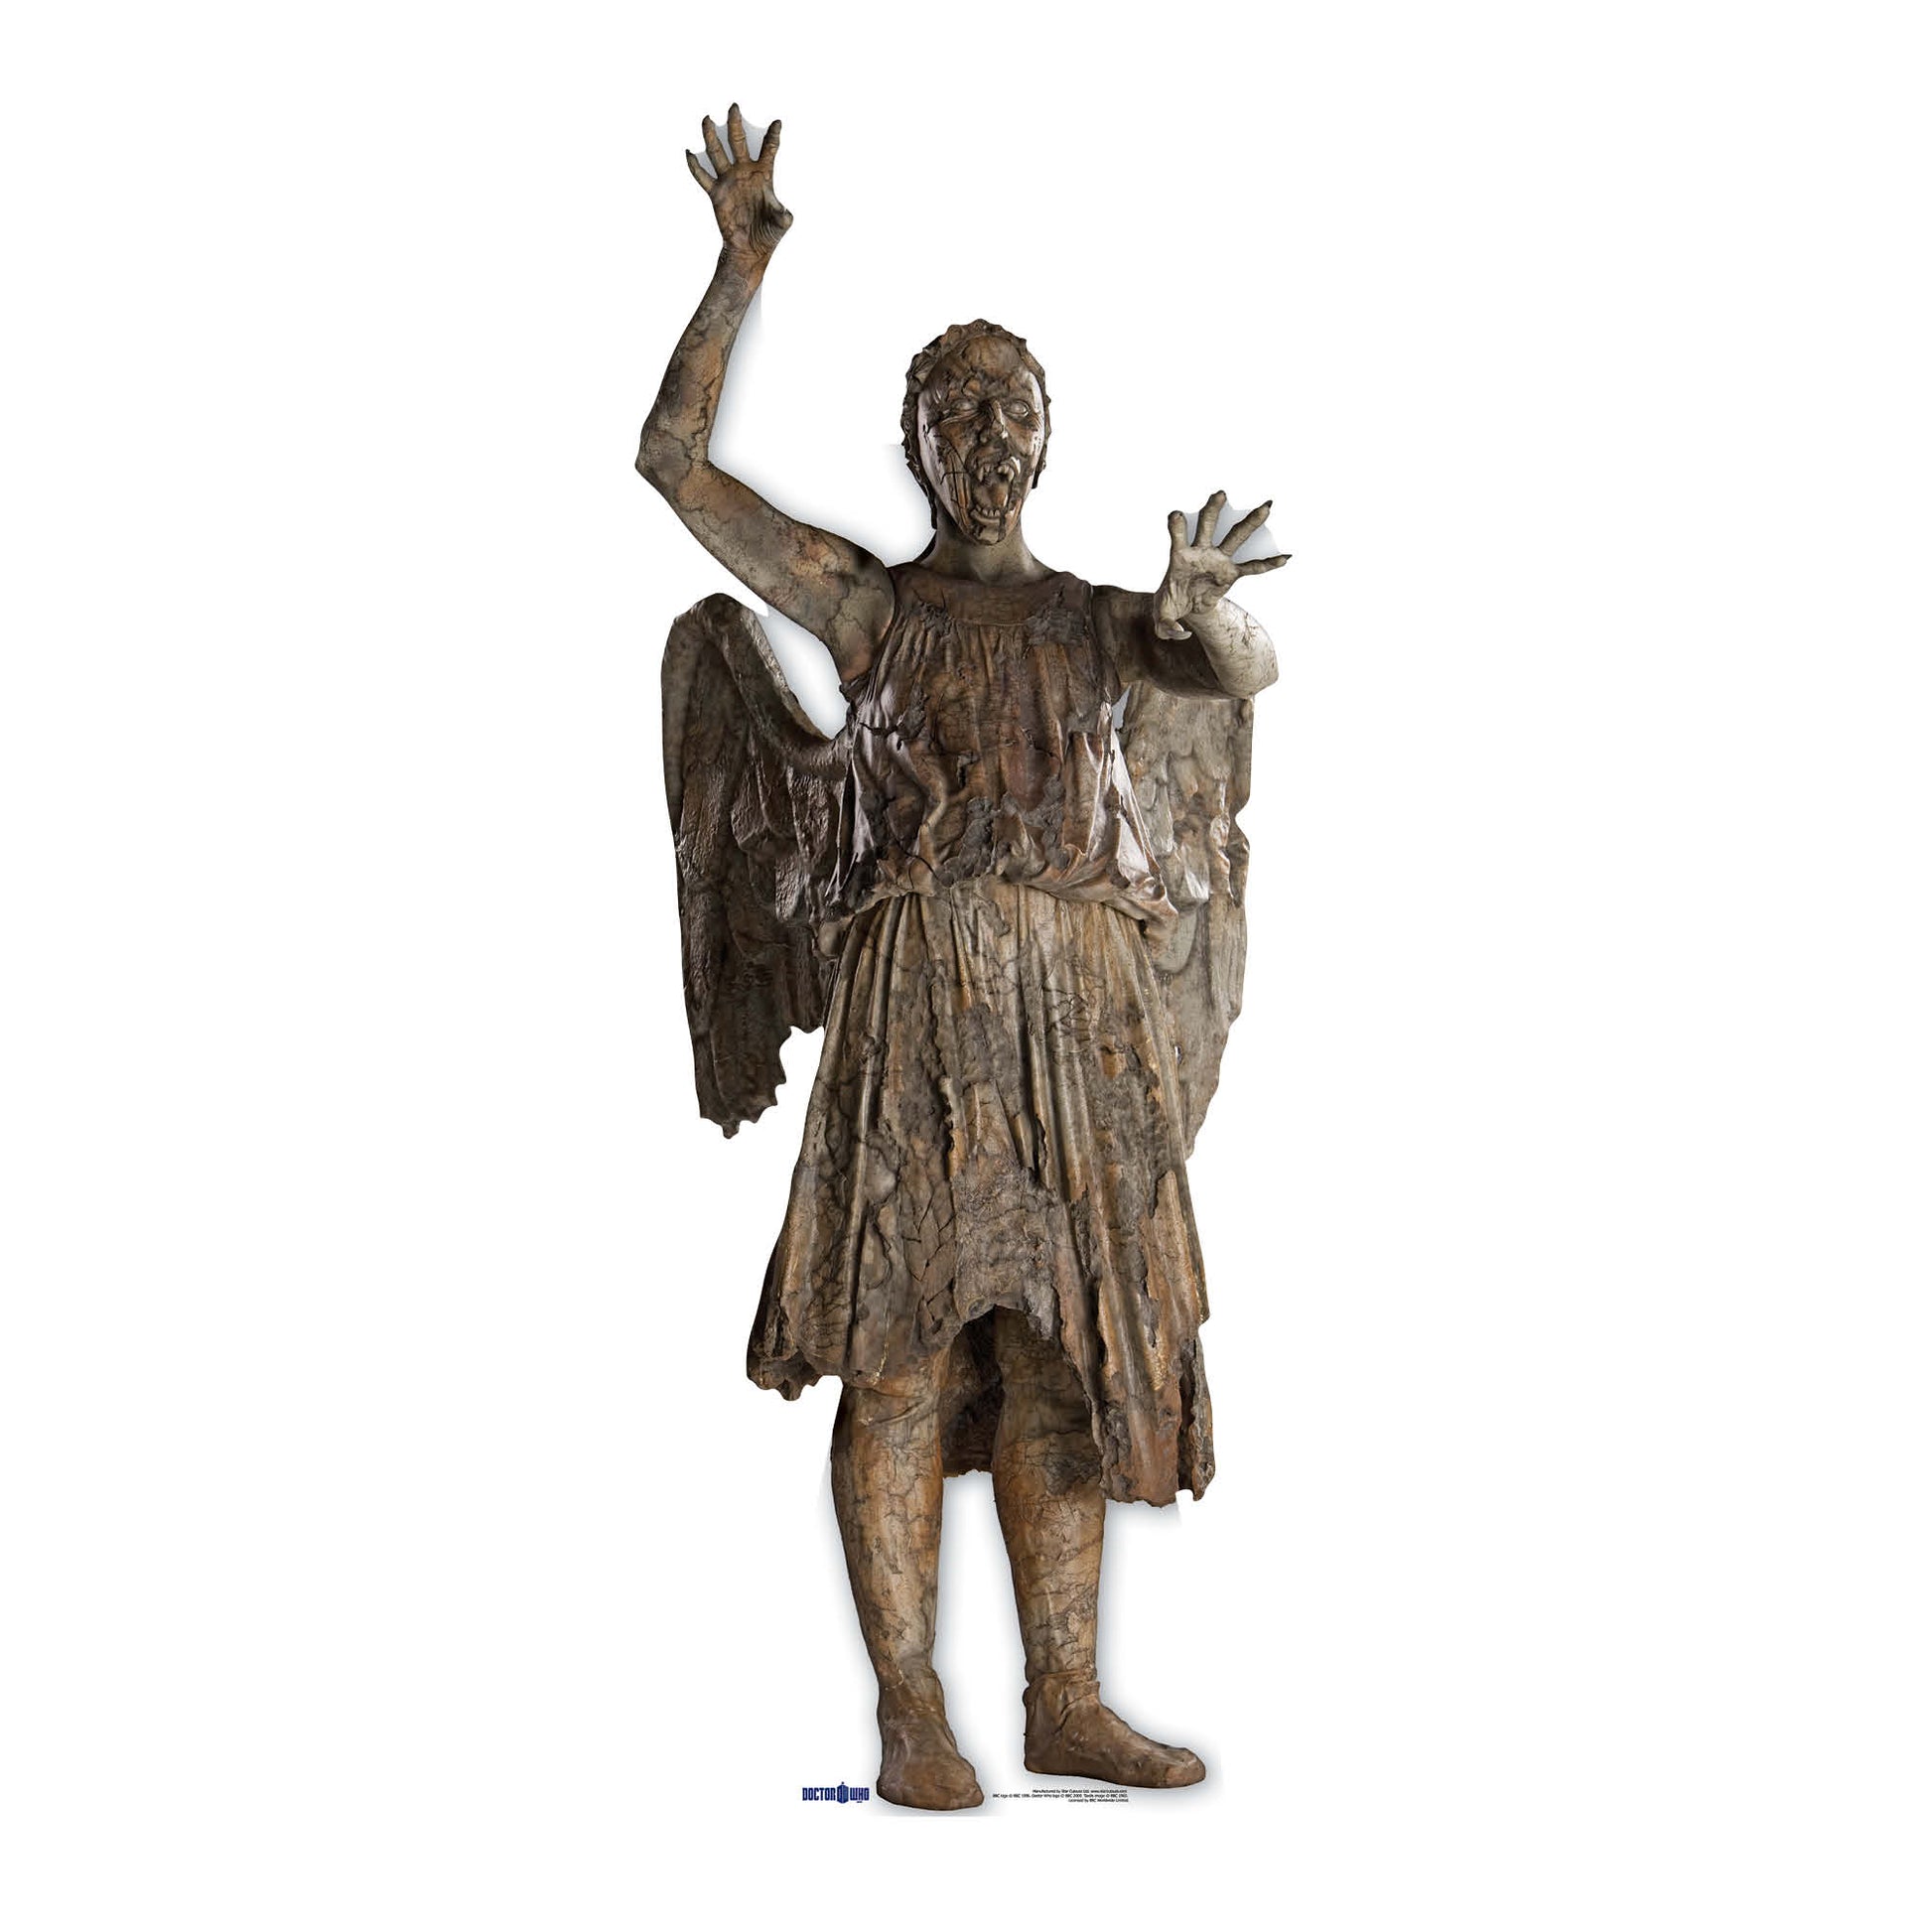 Weeping Angel Attacking Cardboard Cut Out Height 182cm - Star Cutouts